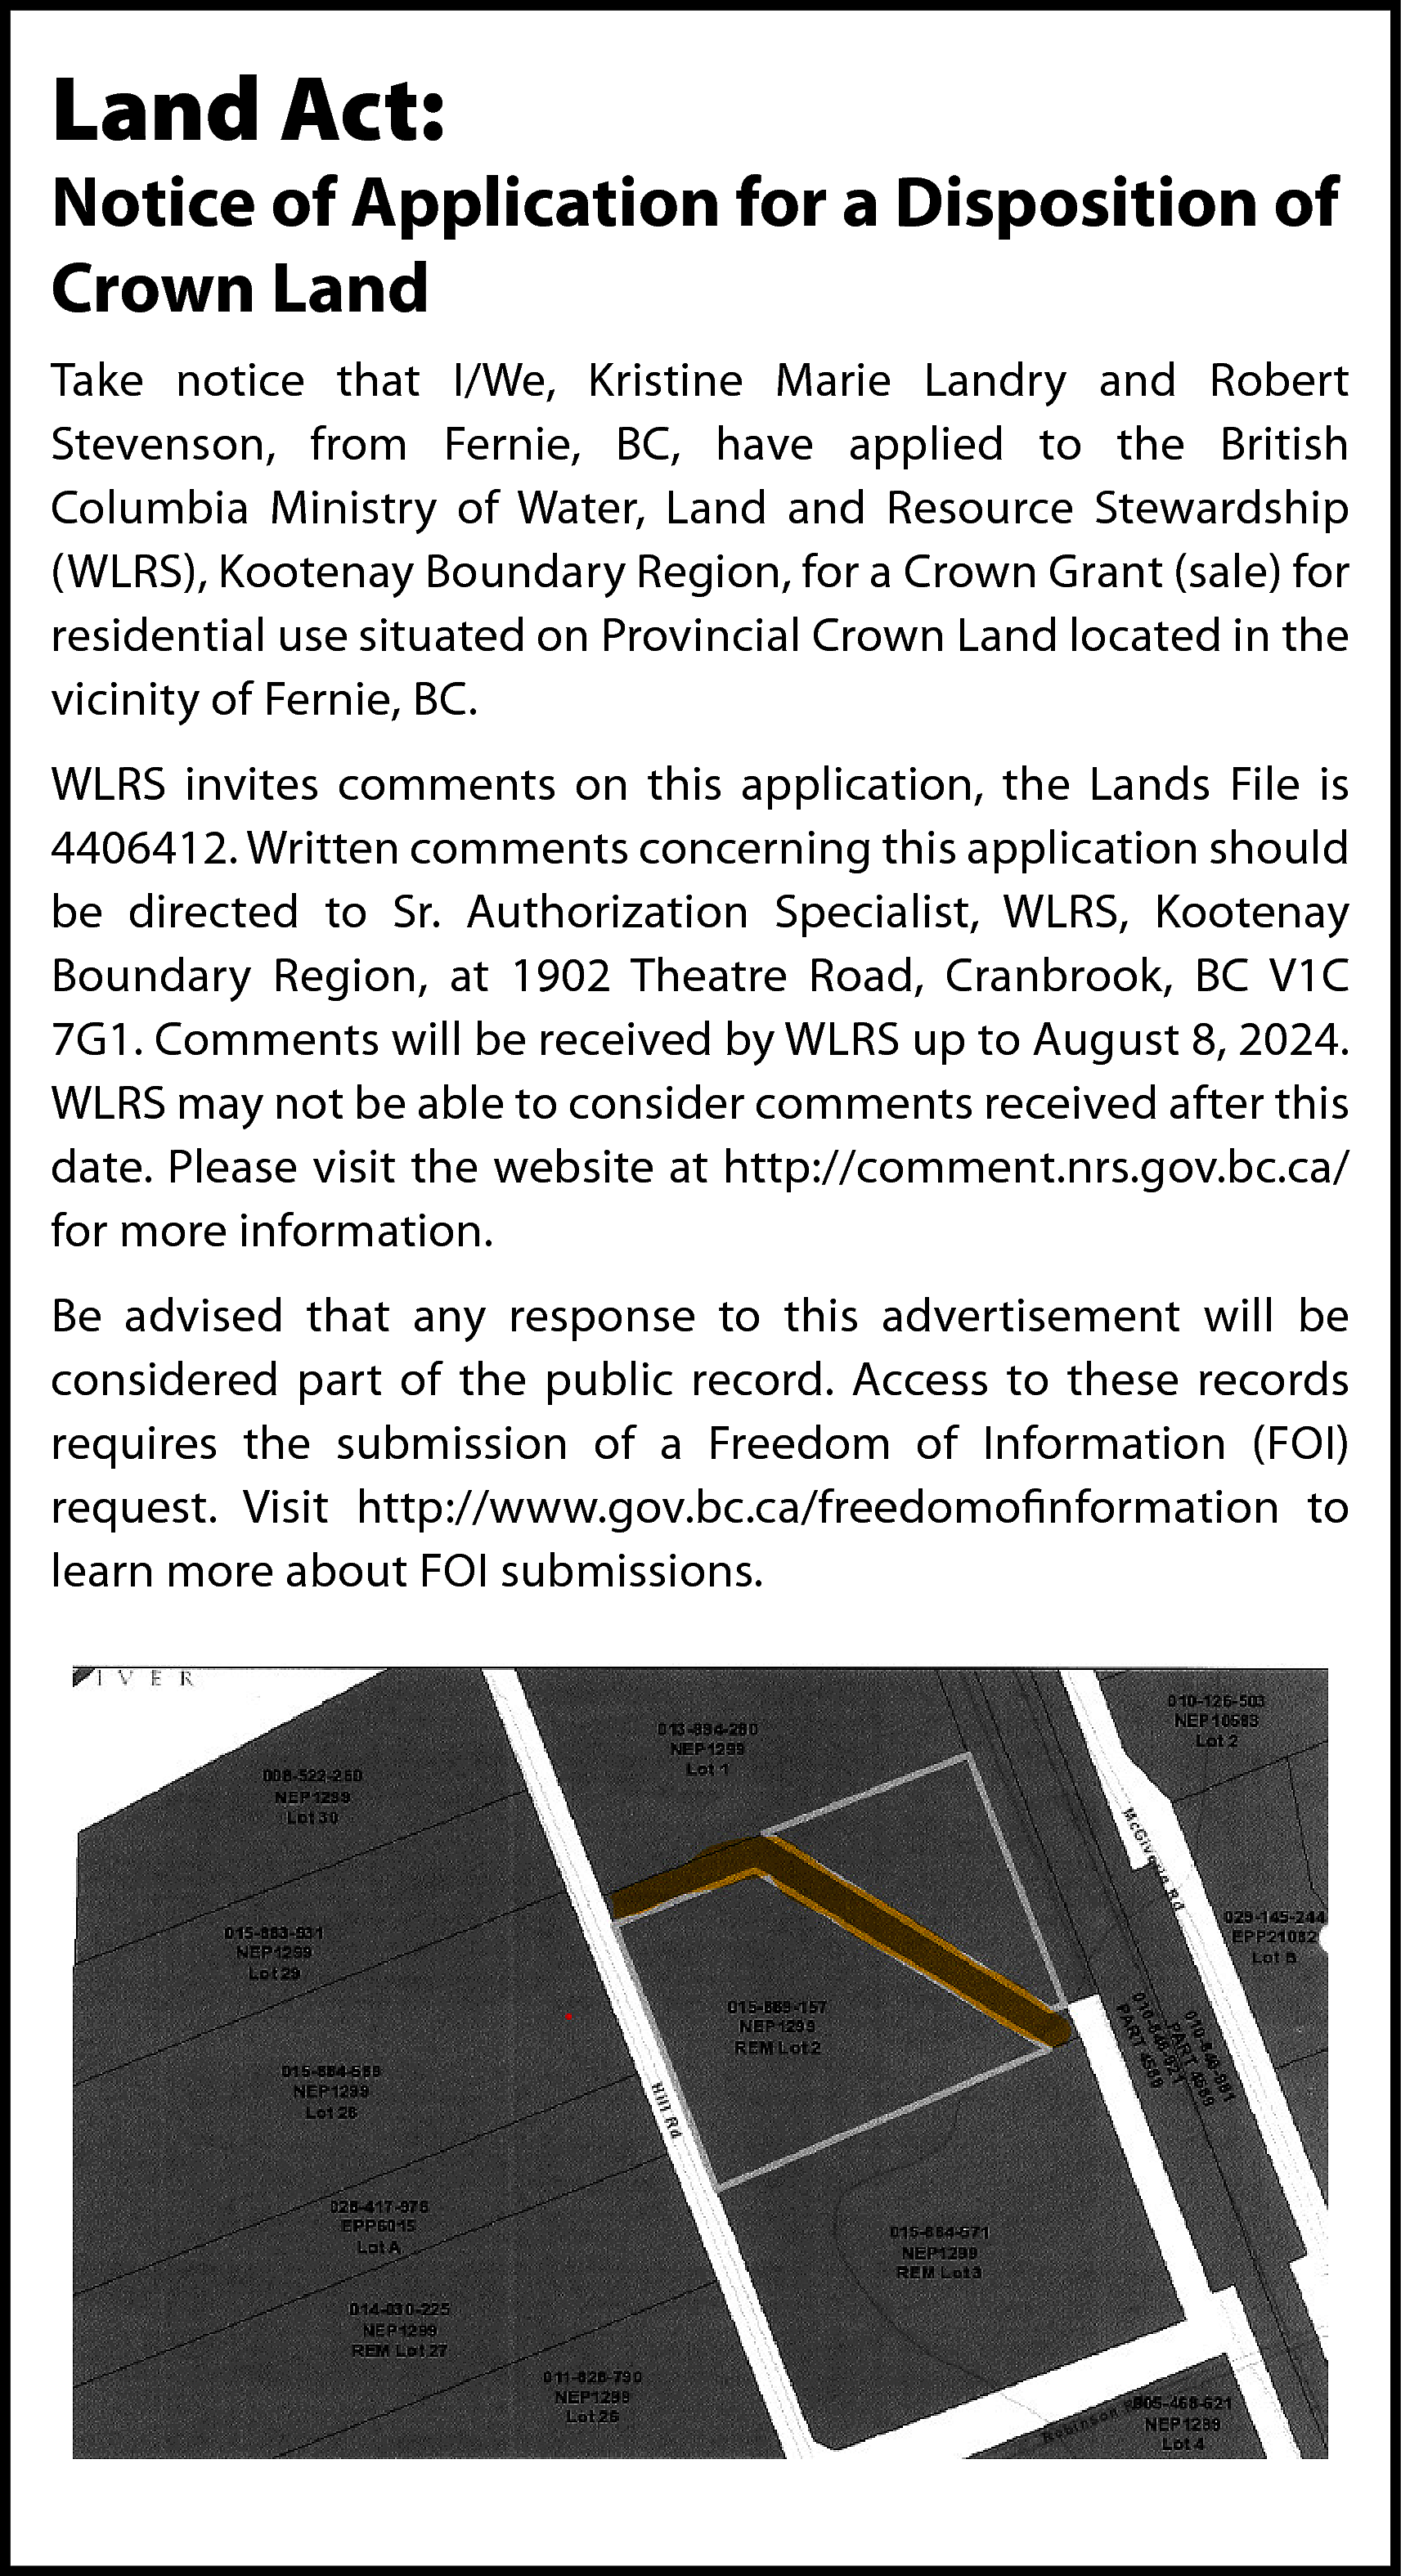 Land Act: <br> <br>Notice of  Land Act:    Notice of Application for a Disposition of  Crown Land  Take notice that I/We, Kristine Marie Landry and Robert  Stevenson, from Fernie, BC, have applied to the British  Columbia Ministry of Water, Land and Resource Stewardship  (WLRS), Kootenay Boundary Region, for a Crown Grant (sale) for  residential use situated on Provincial Crown Land located in the  vicinity of Fernie, BC.  WLRS invites comments on this application, the Lands File is  4406412. Written comments concerning this application should  be directed to Sr. Authorization Specialist, WLRS, Kootenay  Boundary Region, at 1902 Theatre Road, Cranbrook, BC V1C  7G1. Comments will be received by WLRS up to August 8, 2024.  WLRS may not be able to consider comments received after this  date. Please visit the website at http://comment.nrs.gov.bc.ca/  for more information.  Be advised that any response to this advertisement will be  considered part of the public record. Access to these records  requires the submission of a Freedom of Information (FOI)  request. Visit http://www.gov.bc.ca/freedomofinformation to  learn more about FOI submissions.    